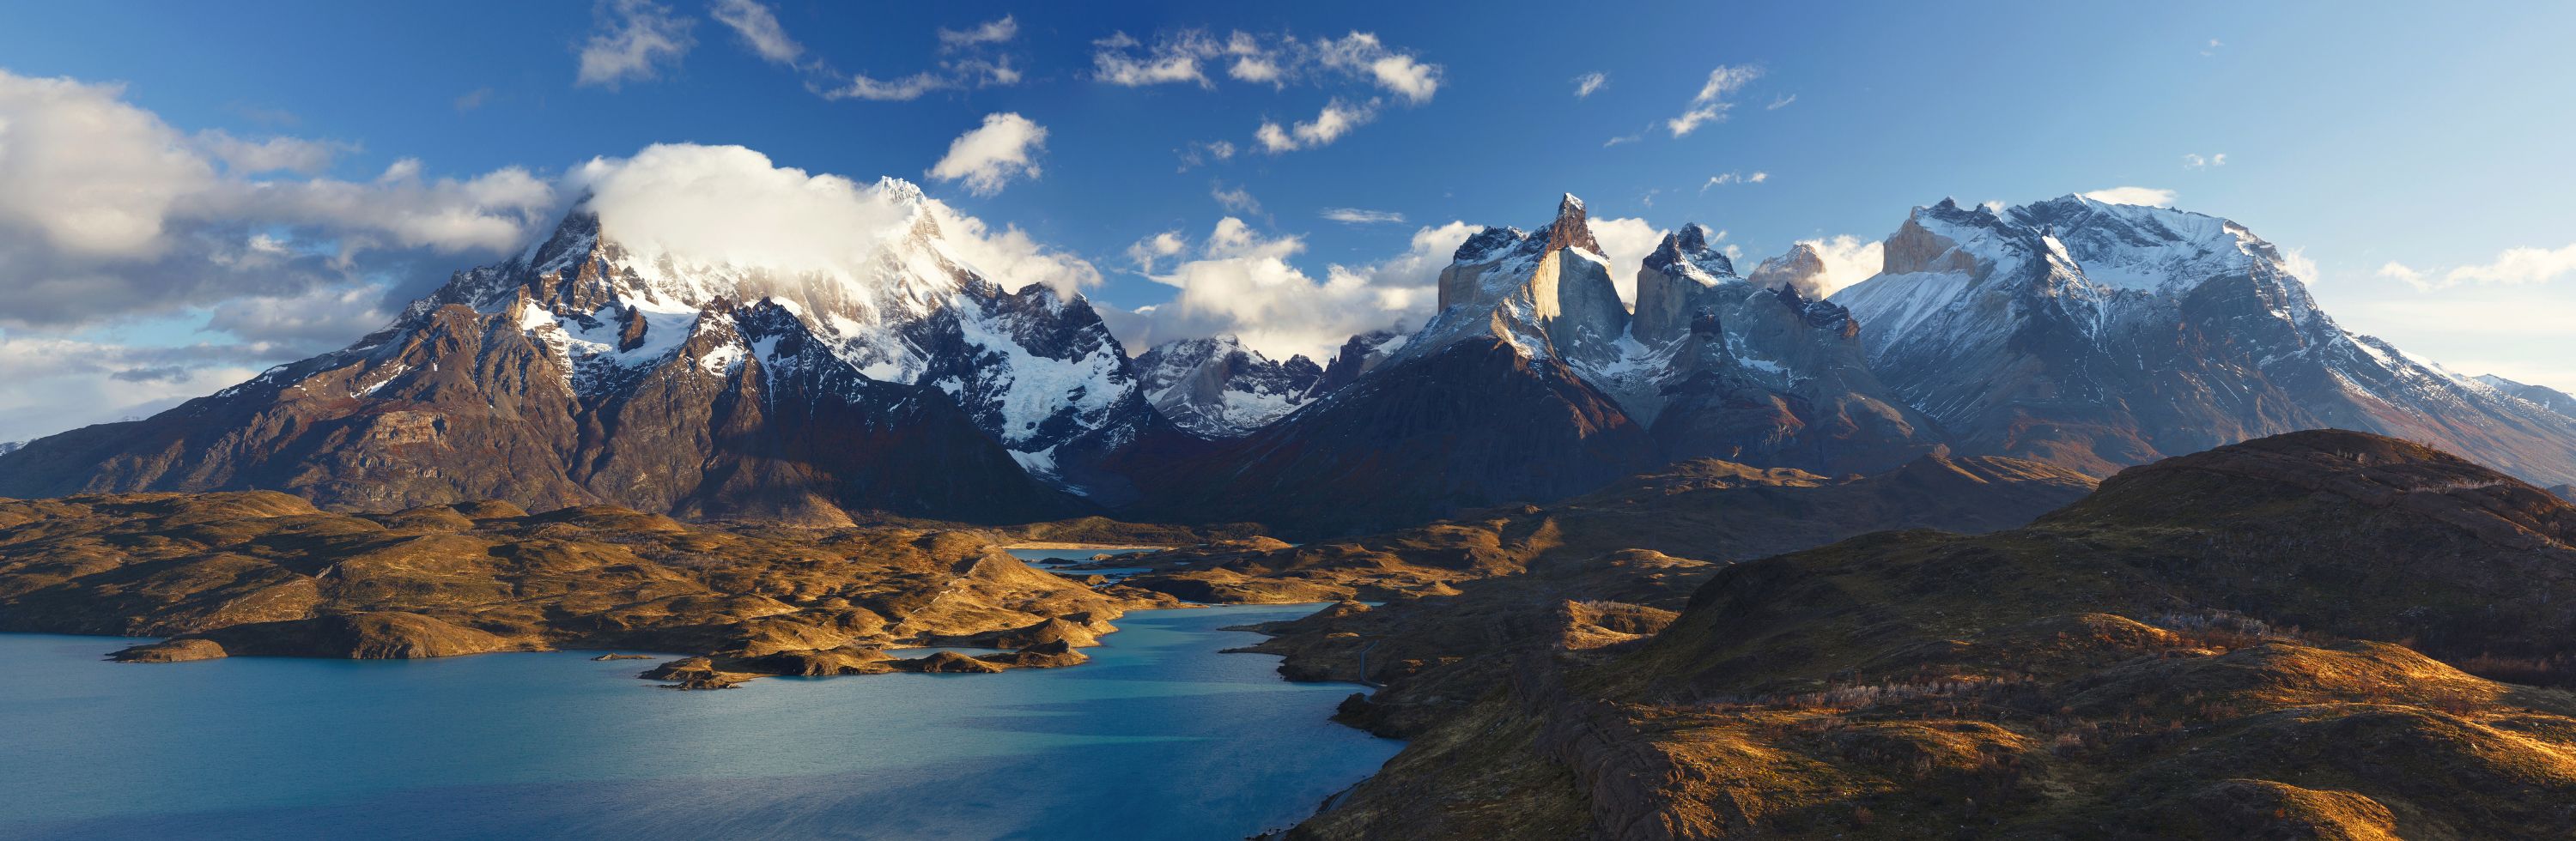 BGYB Destination : Suggested itinerary for a cruise in Patagonia